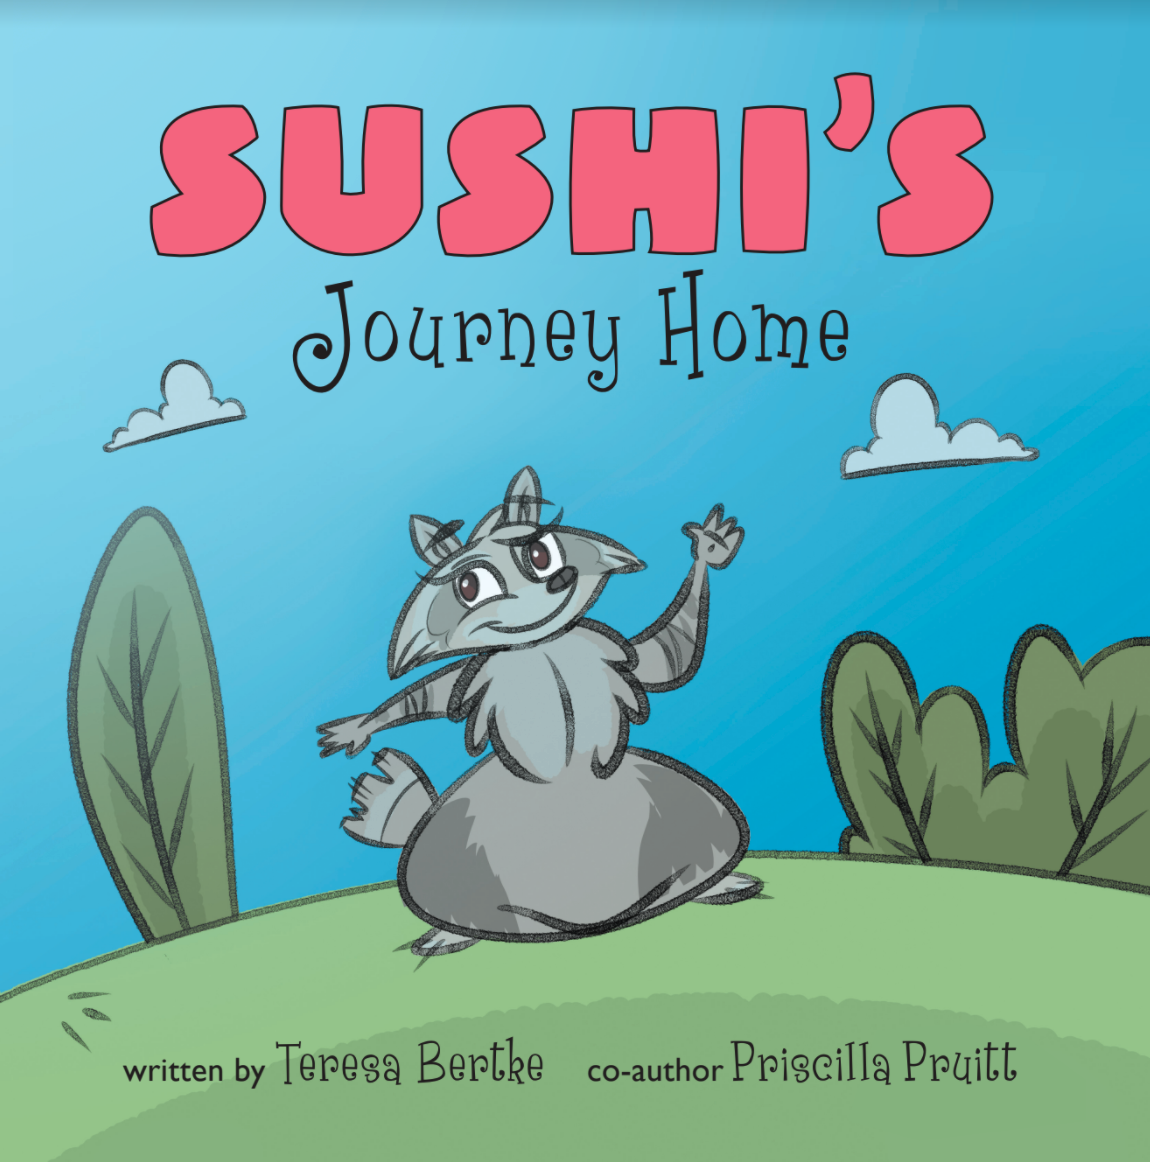 New children’s book "Sushi’s Journey Home" by Teresa Bertke is released. This story is of a baby raccoon who embarks on a journey in an attempt to find her forever home.